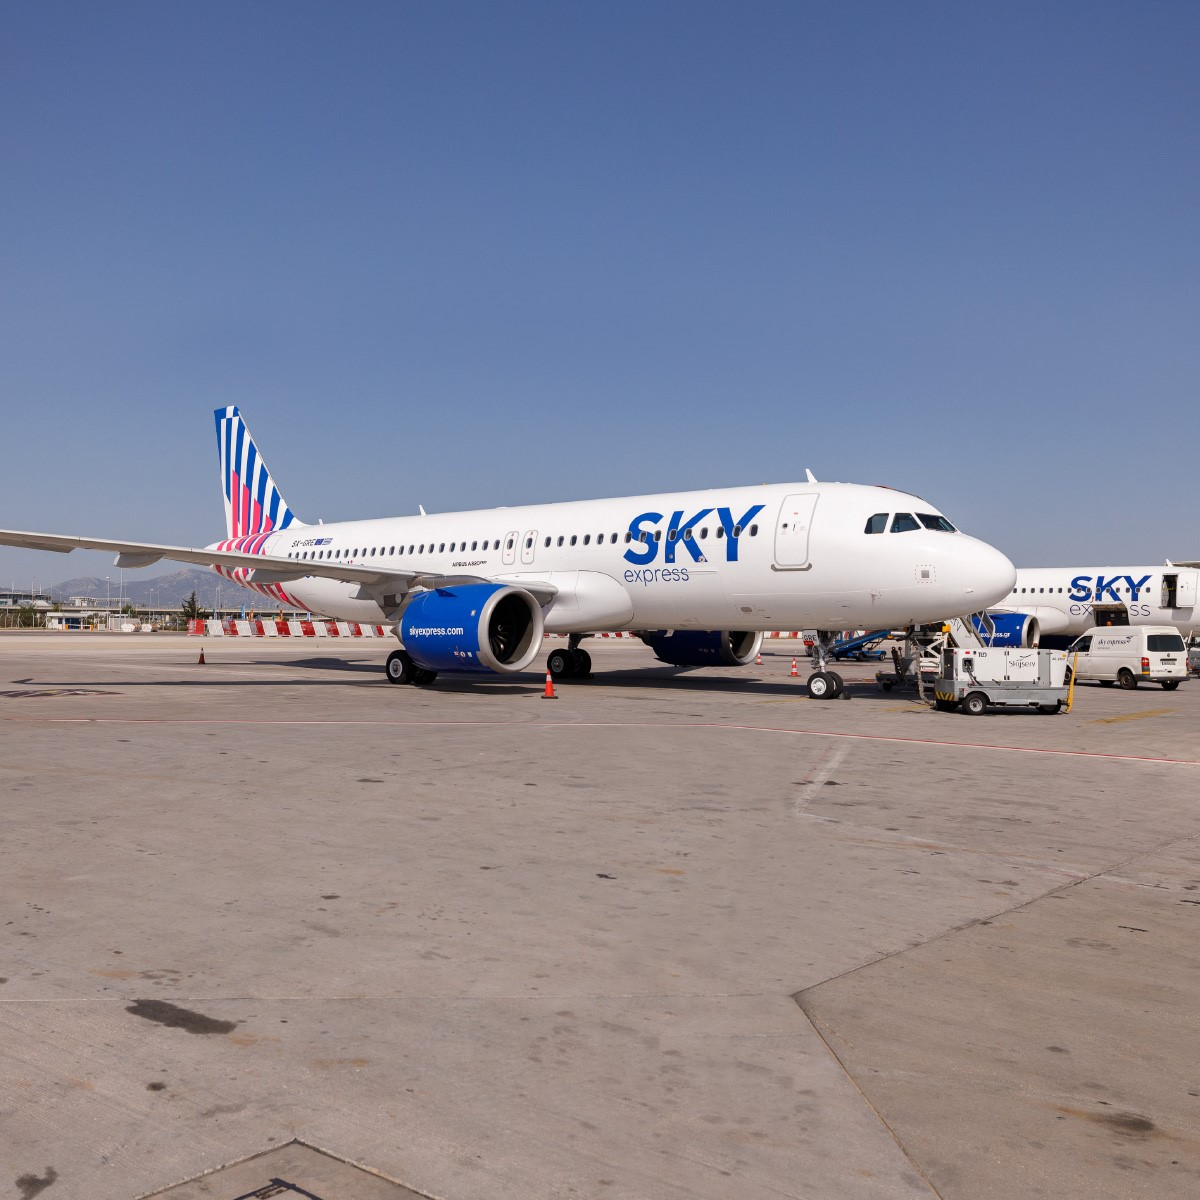 SKY express: Continues investments with new aircraft